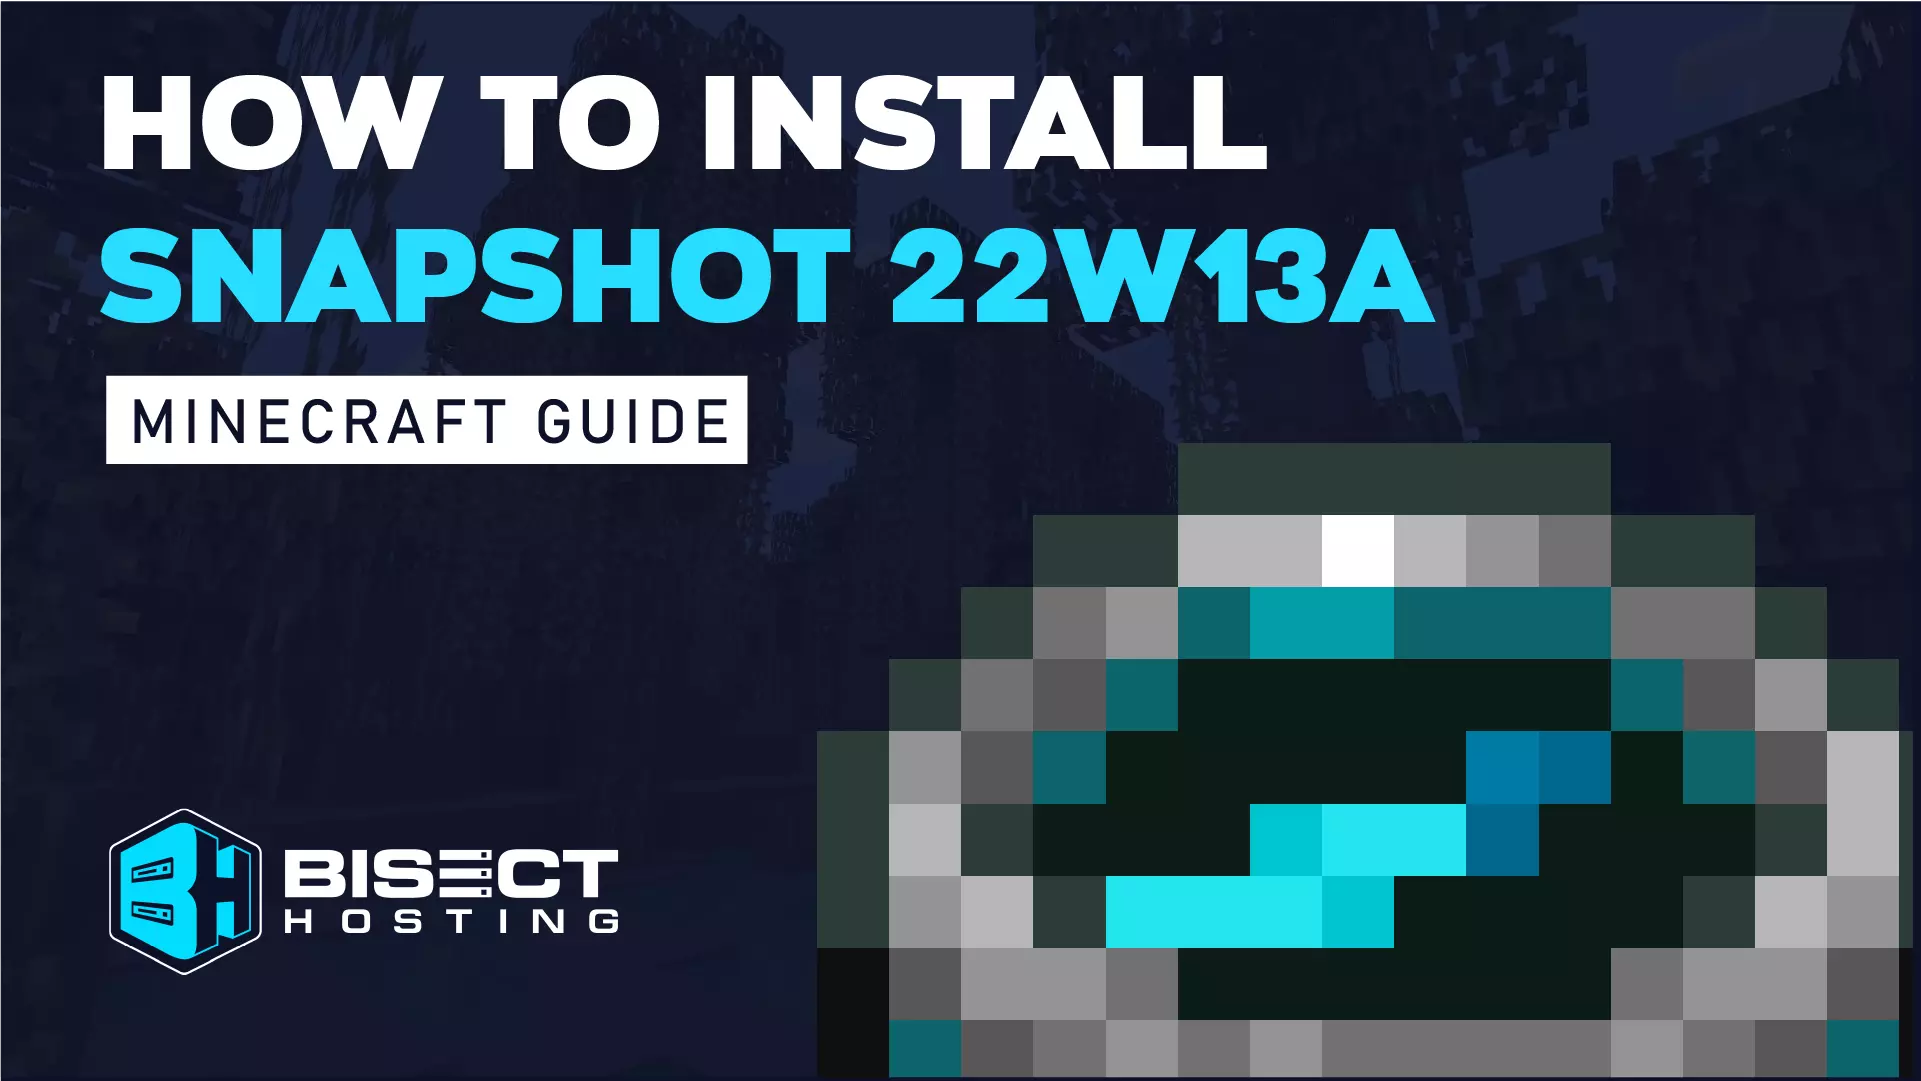 How to Install Minecraft Snapshot 22w14a